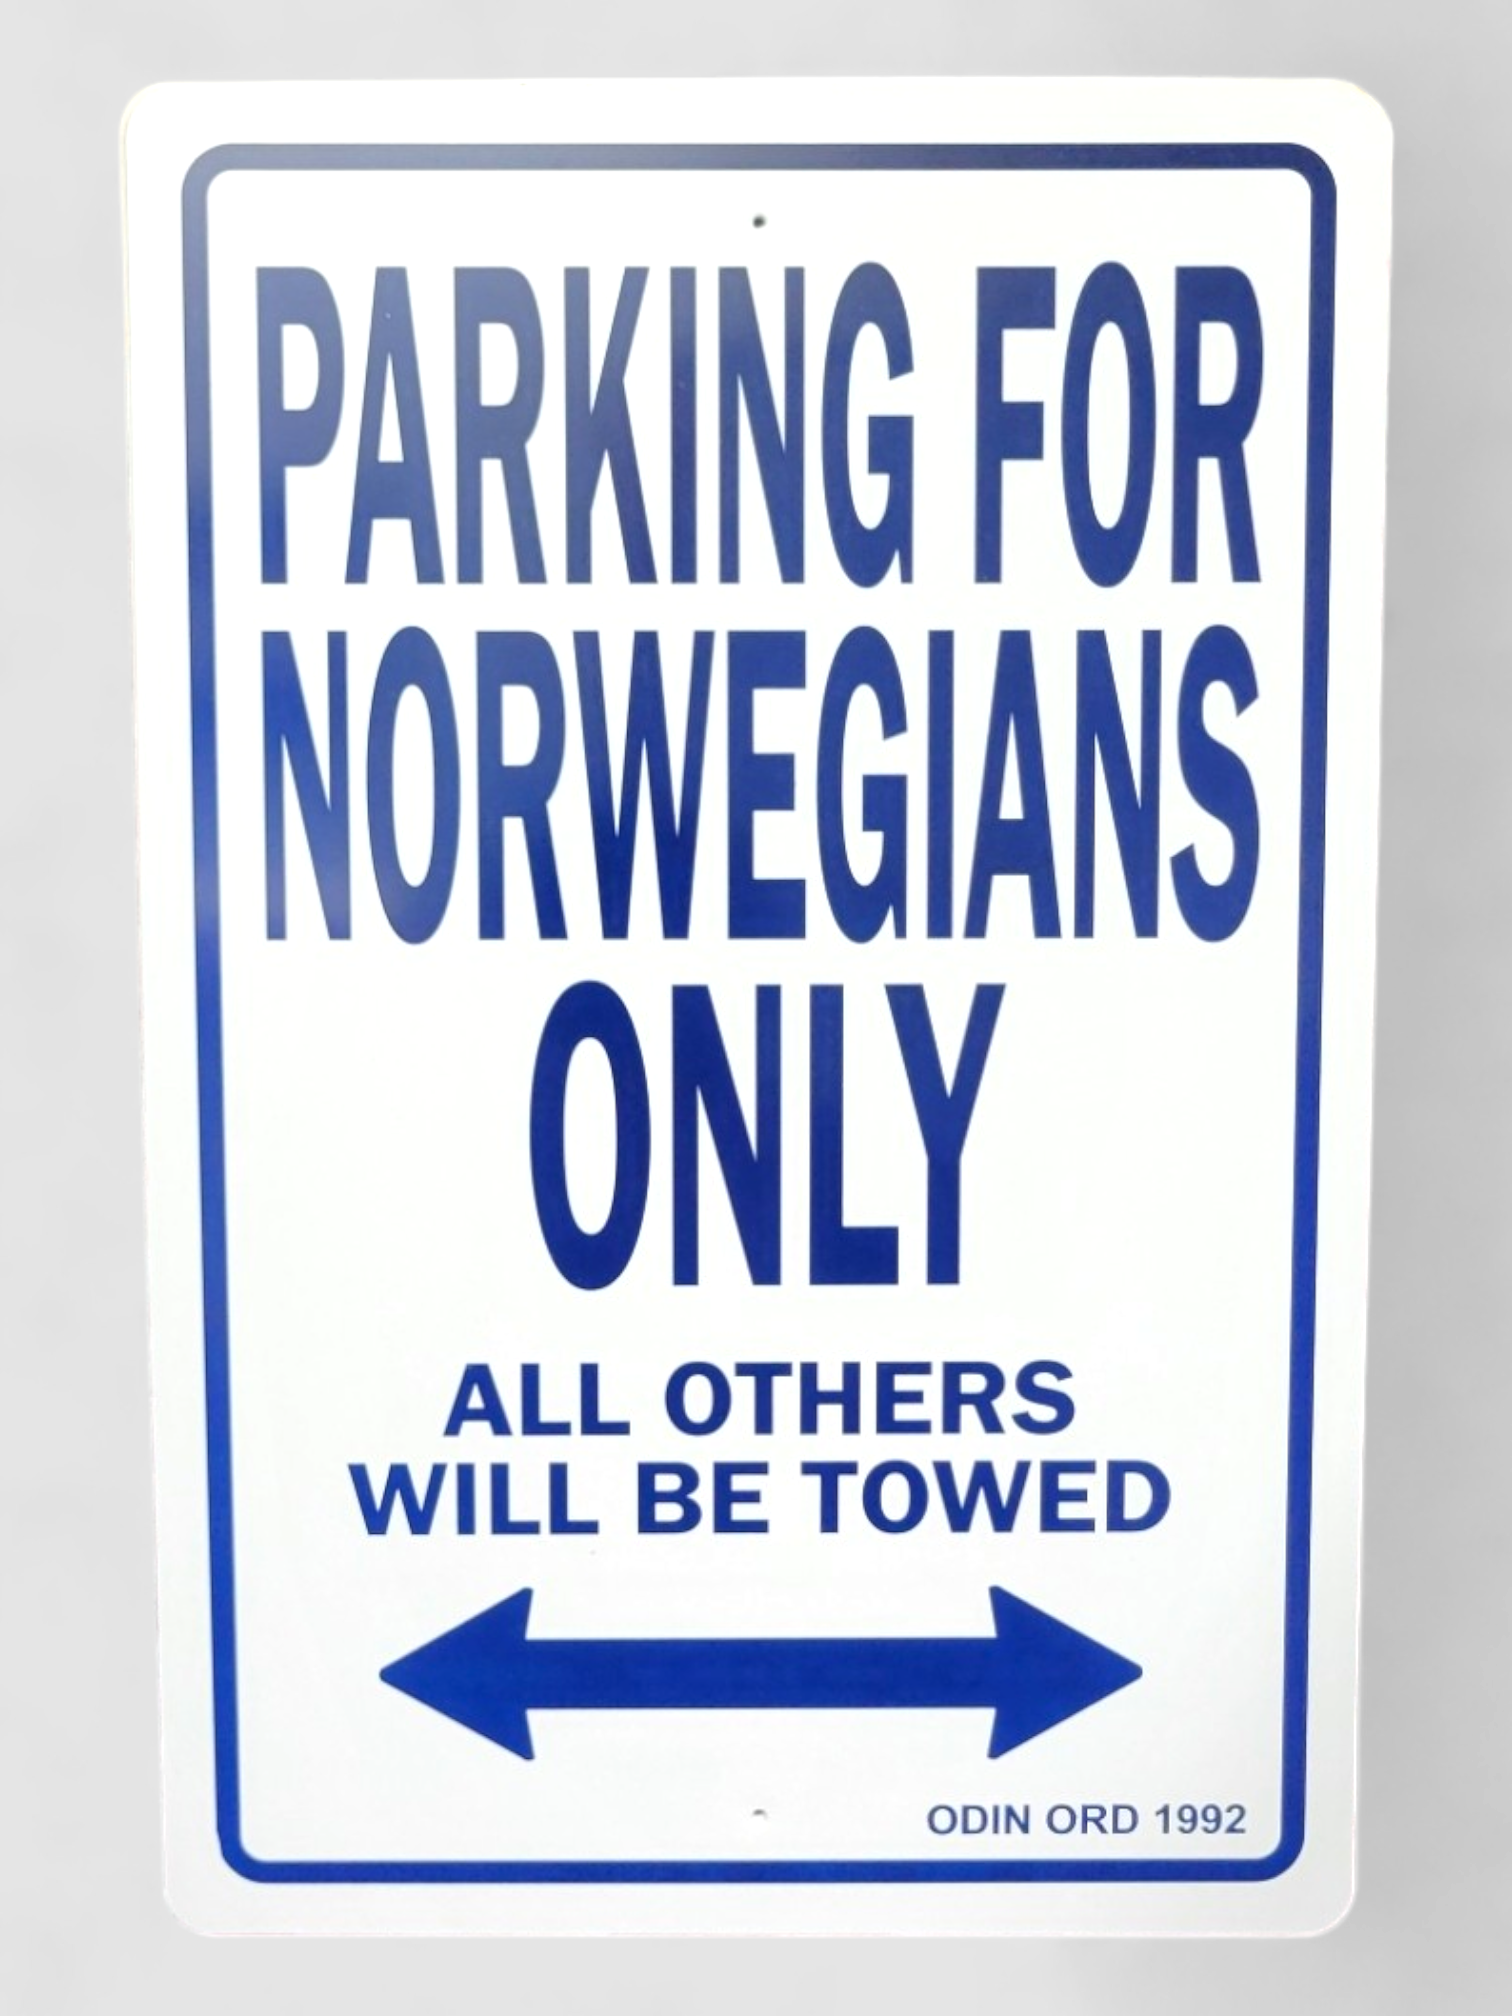 Sign: "Parking for Norwegians Only"